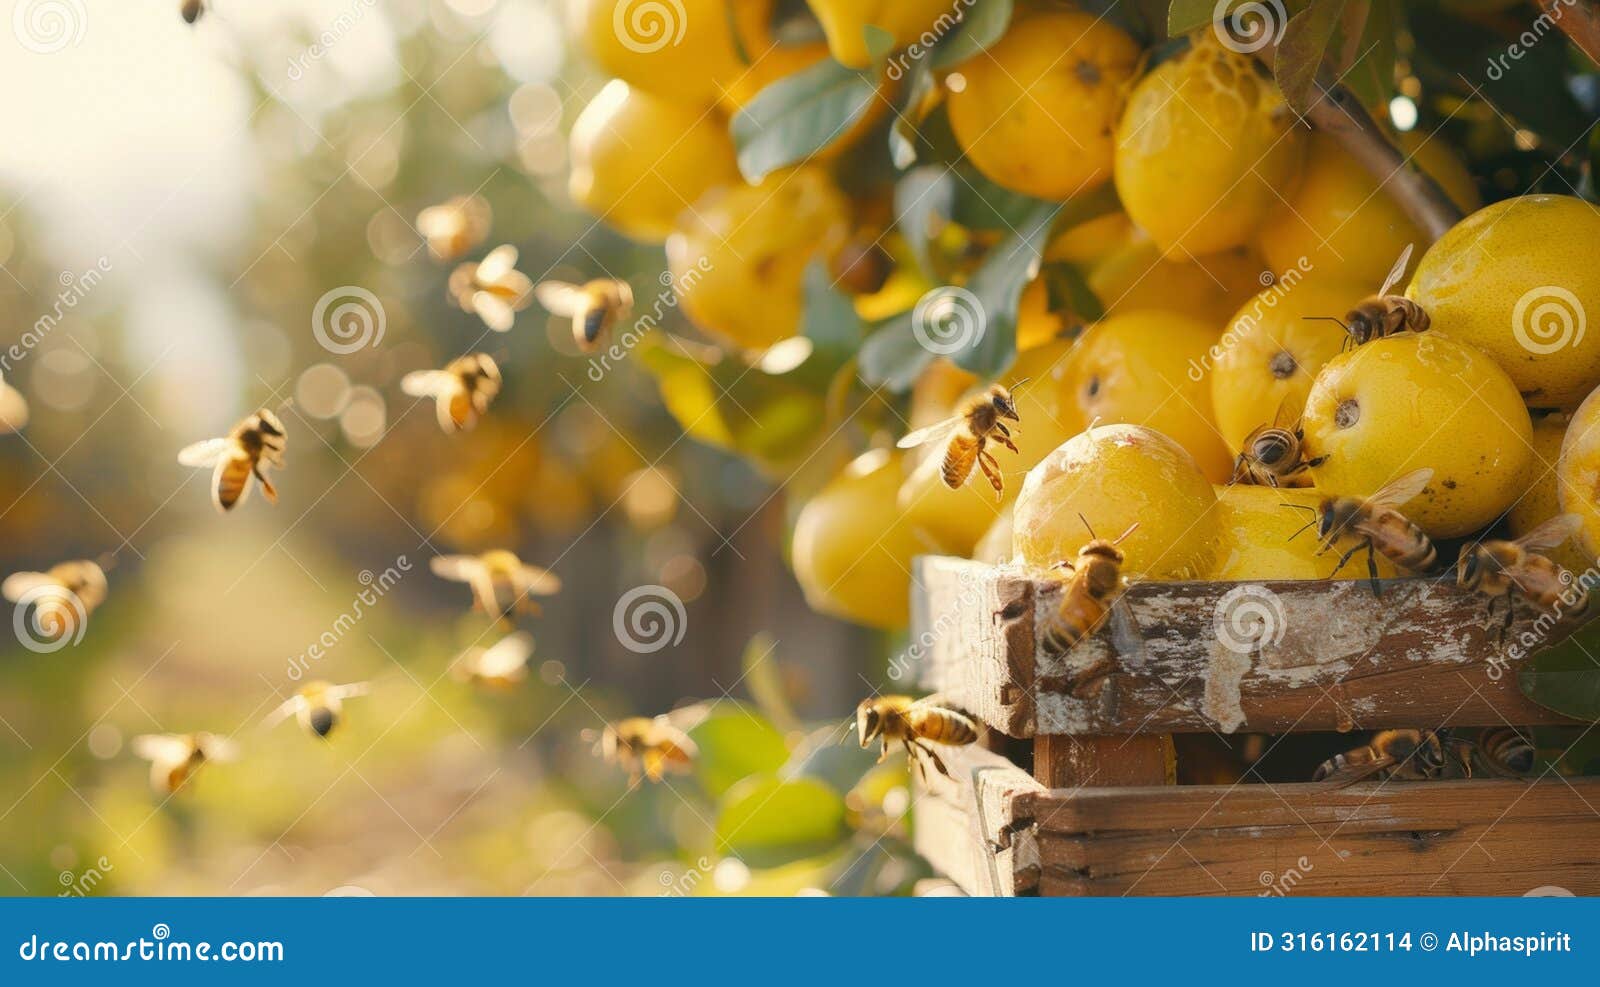 honeybees gather on ripe fruits in an orchard, showcasing pollination and agriculture